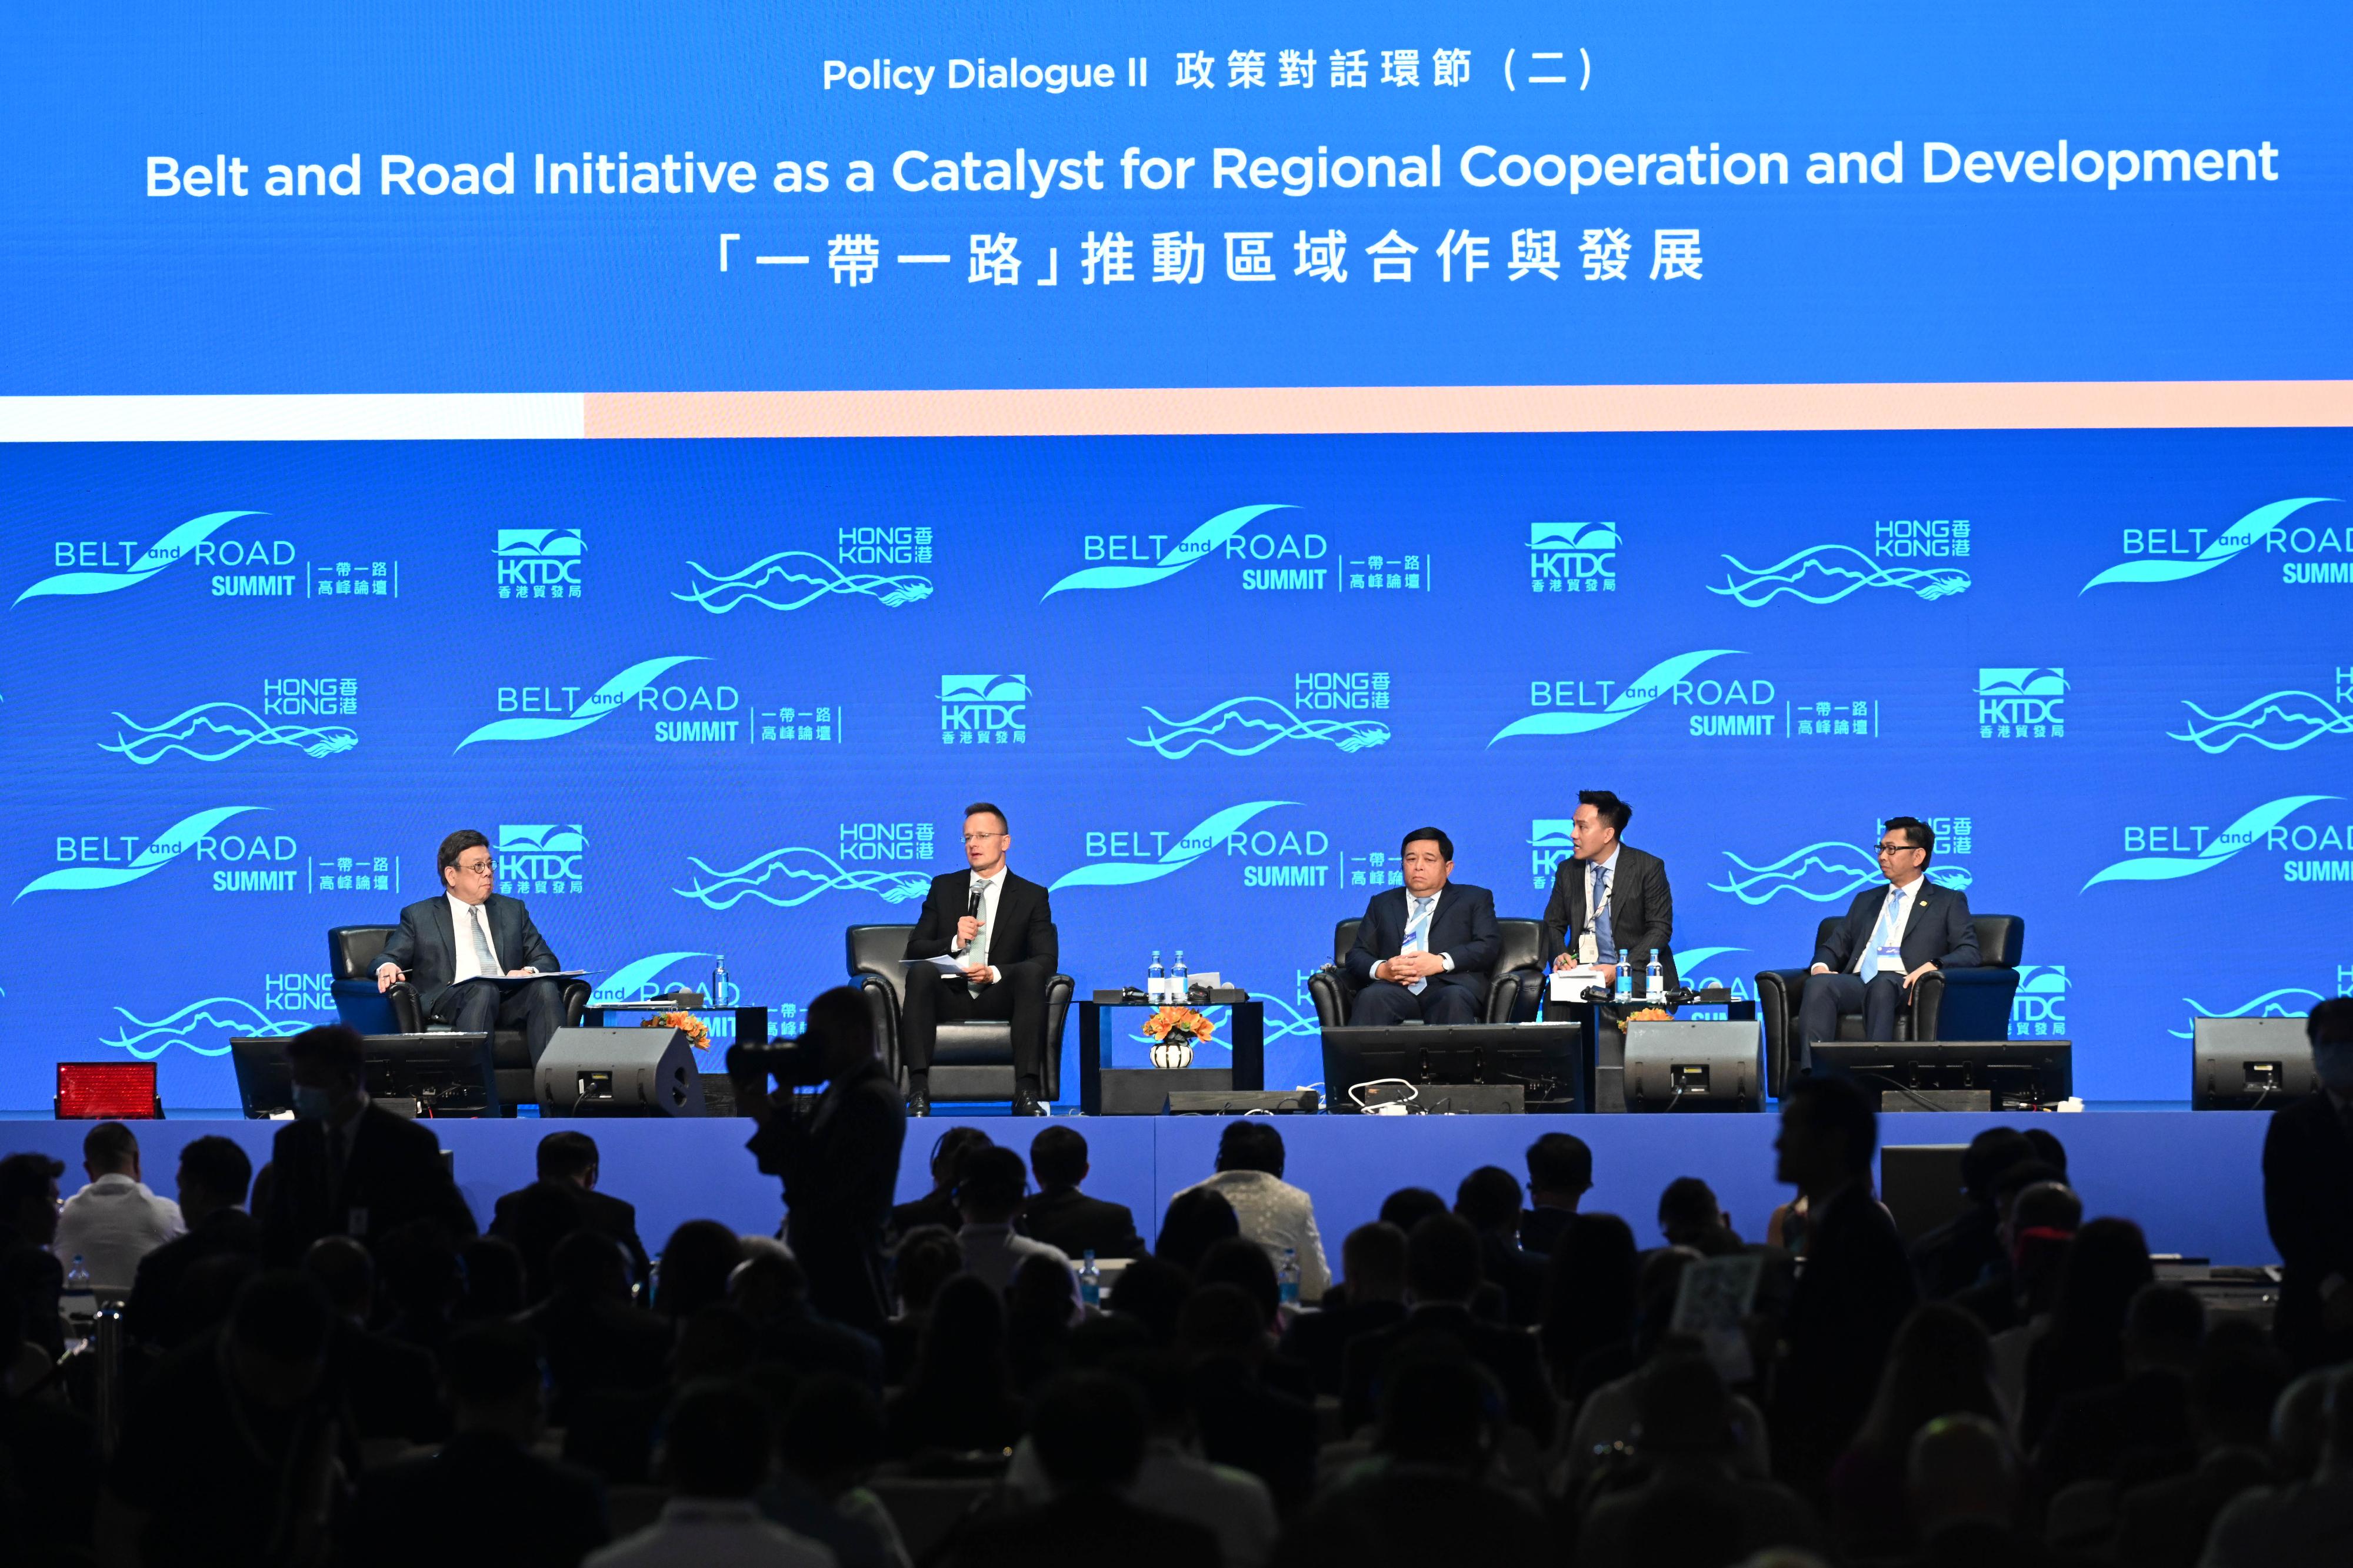 The eighth Belt and Road Summit opened today (September 13). The Secretary for Commerce and Economic Development, Mr Algernon Yau, chaired the policy dialogue session titled "Belt and Road Initiative as a Catalyst for Regional Cooperation and Development" to discuss market integration and connectivity among economies. Mr Yau (first left) was joined by the Minister of Foreign Affairs and Trade of Hungary, Mr Péter Szijjártó (second left); the Minister of Planning and Investment of Vietnam, Mr Nguyen Chi Dzung (third left); and the Deputy Minister of Foreign Affairs of Malaysia, Datuk Mohamad bin Alamin (first right).